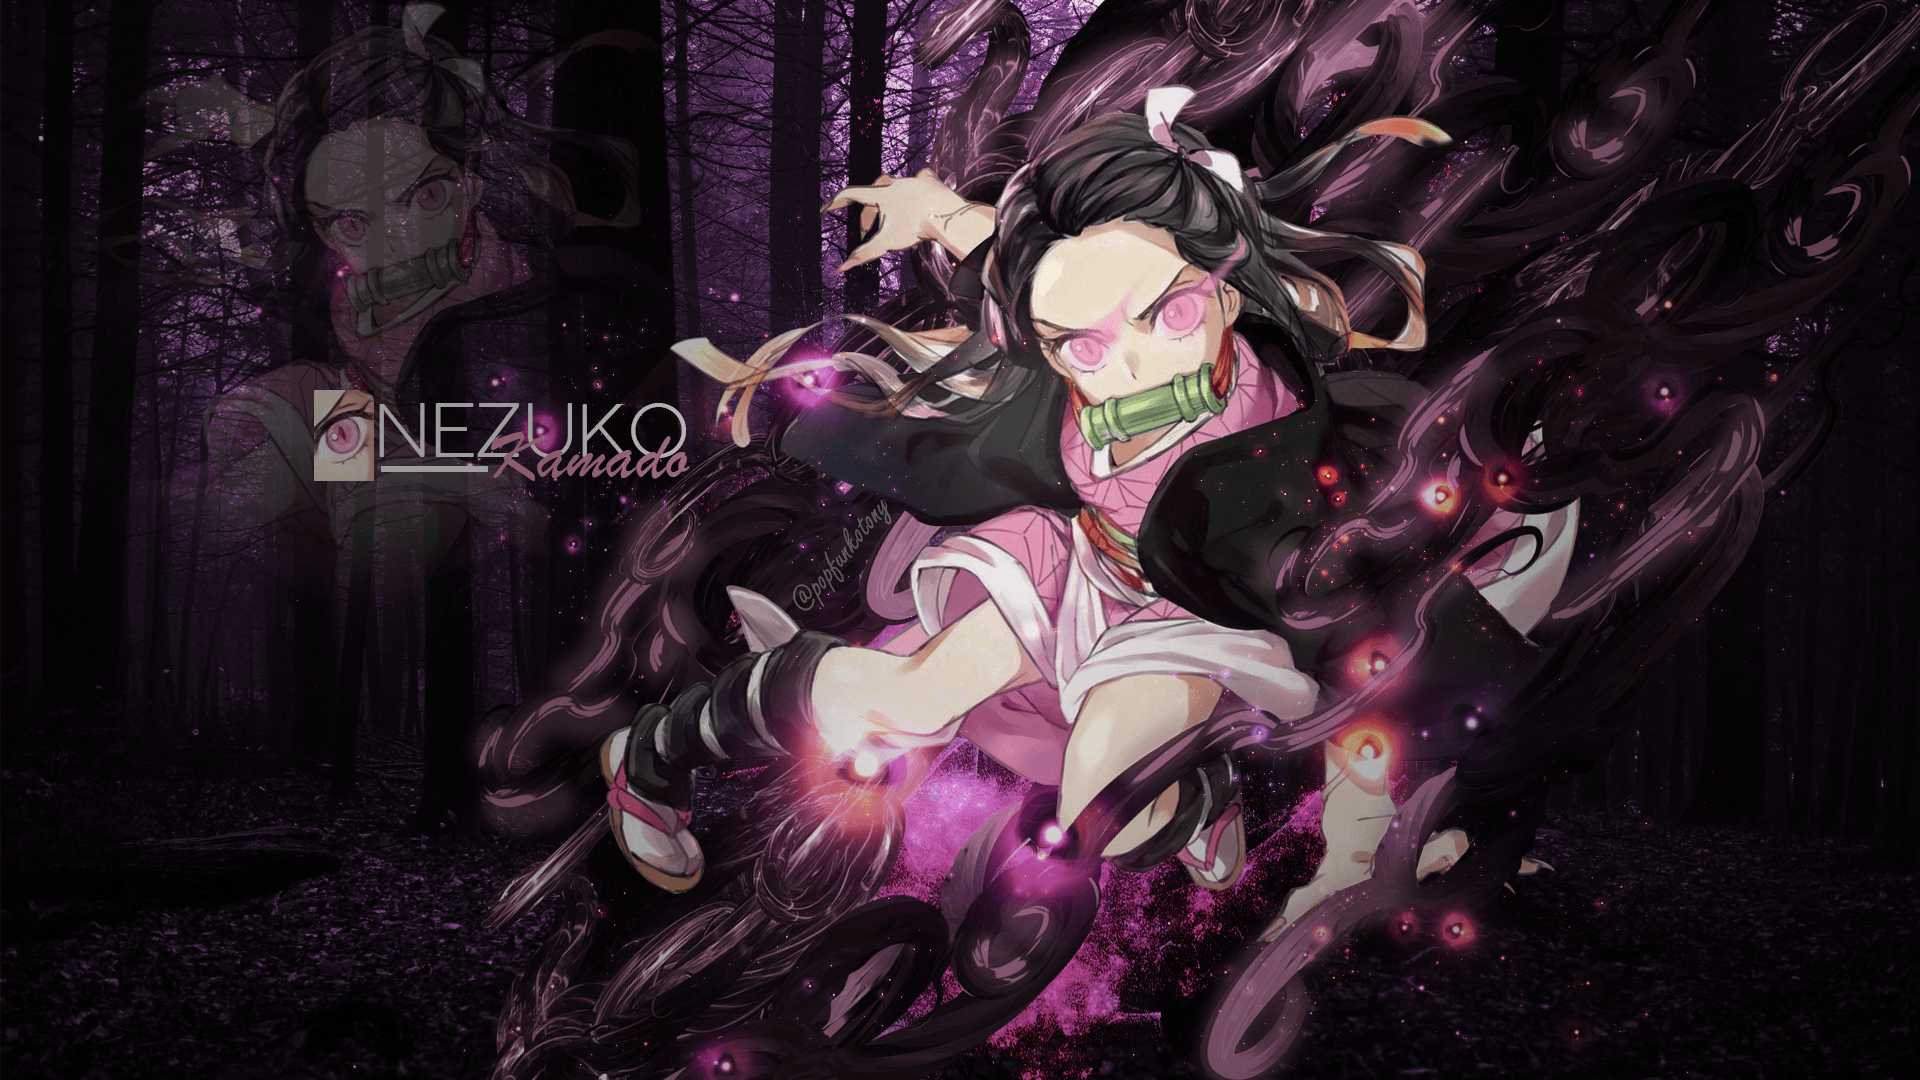 heres a wallpapers i created of our best girl <3 : Nezuko